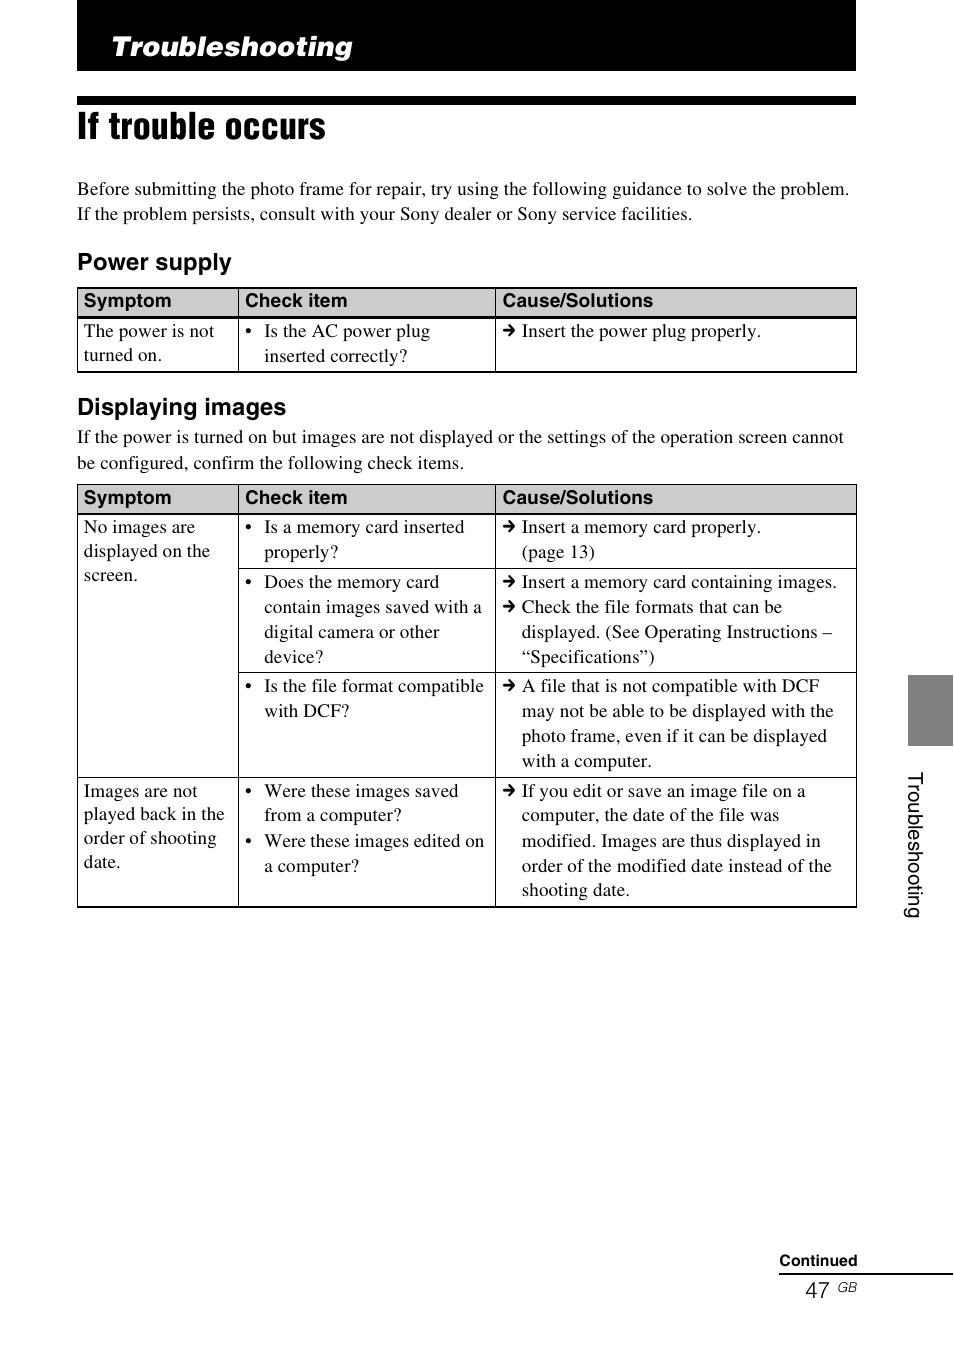 Troubleshooting, If trouble occurs | Sony DPF-D1010 User Manual | Page 47 / 55